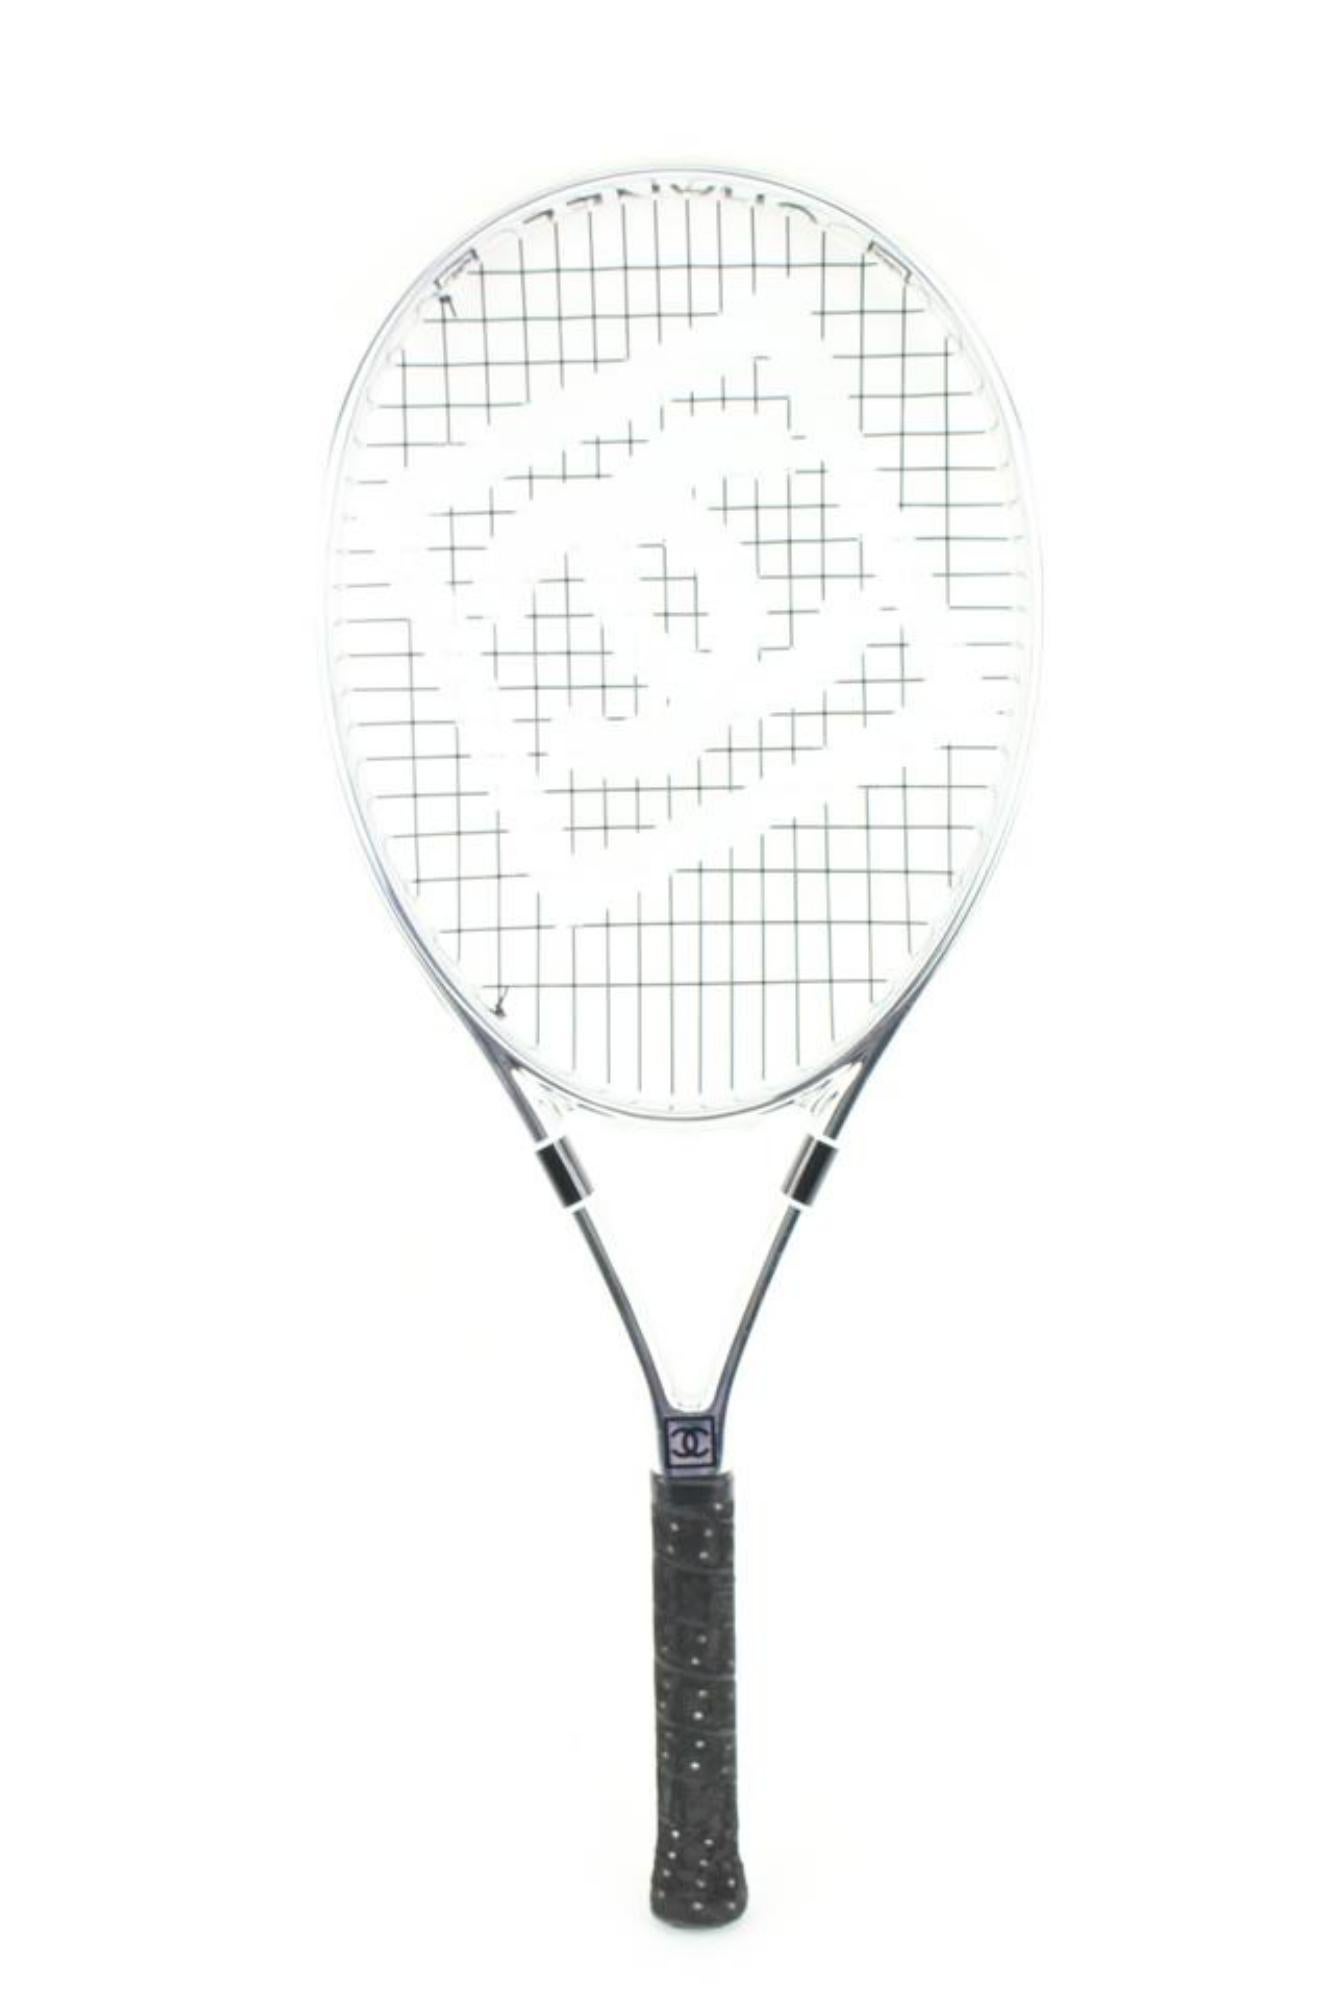 most expensive tennis racket